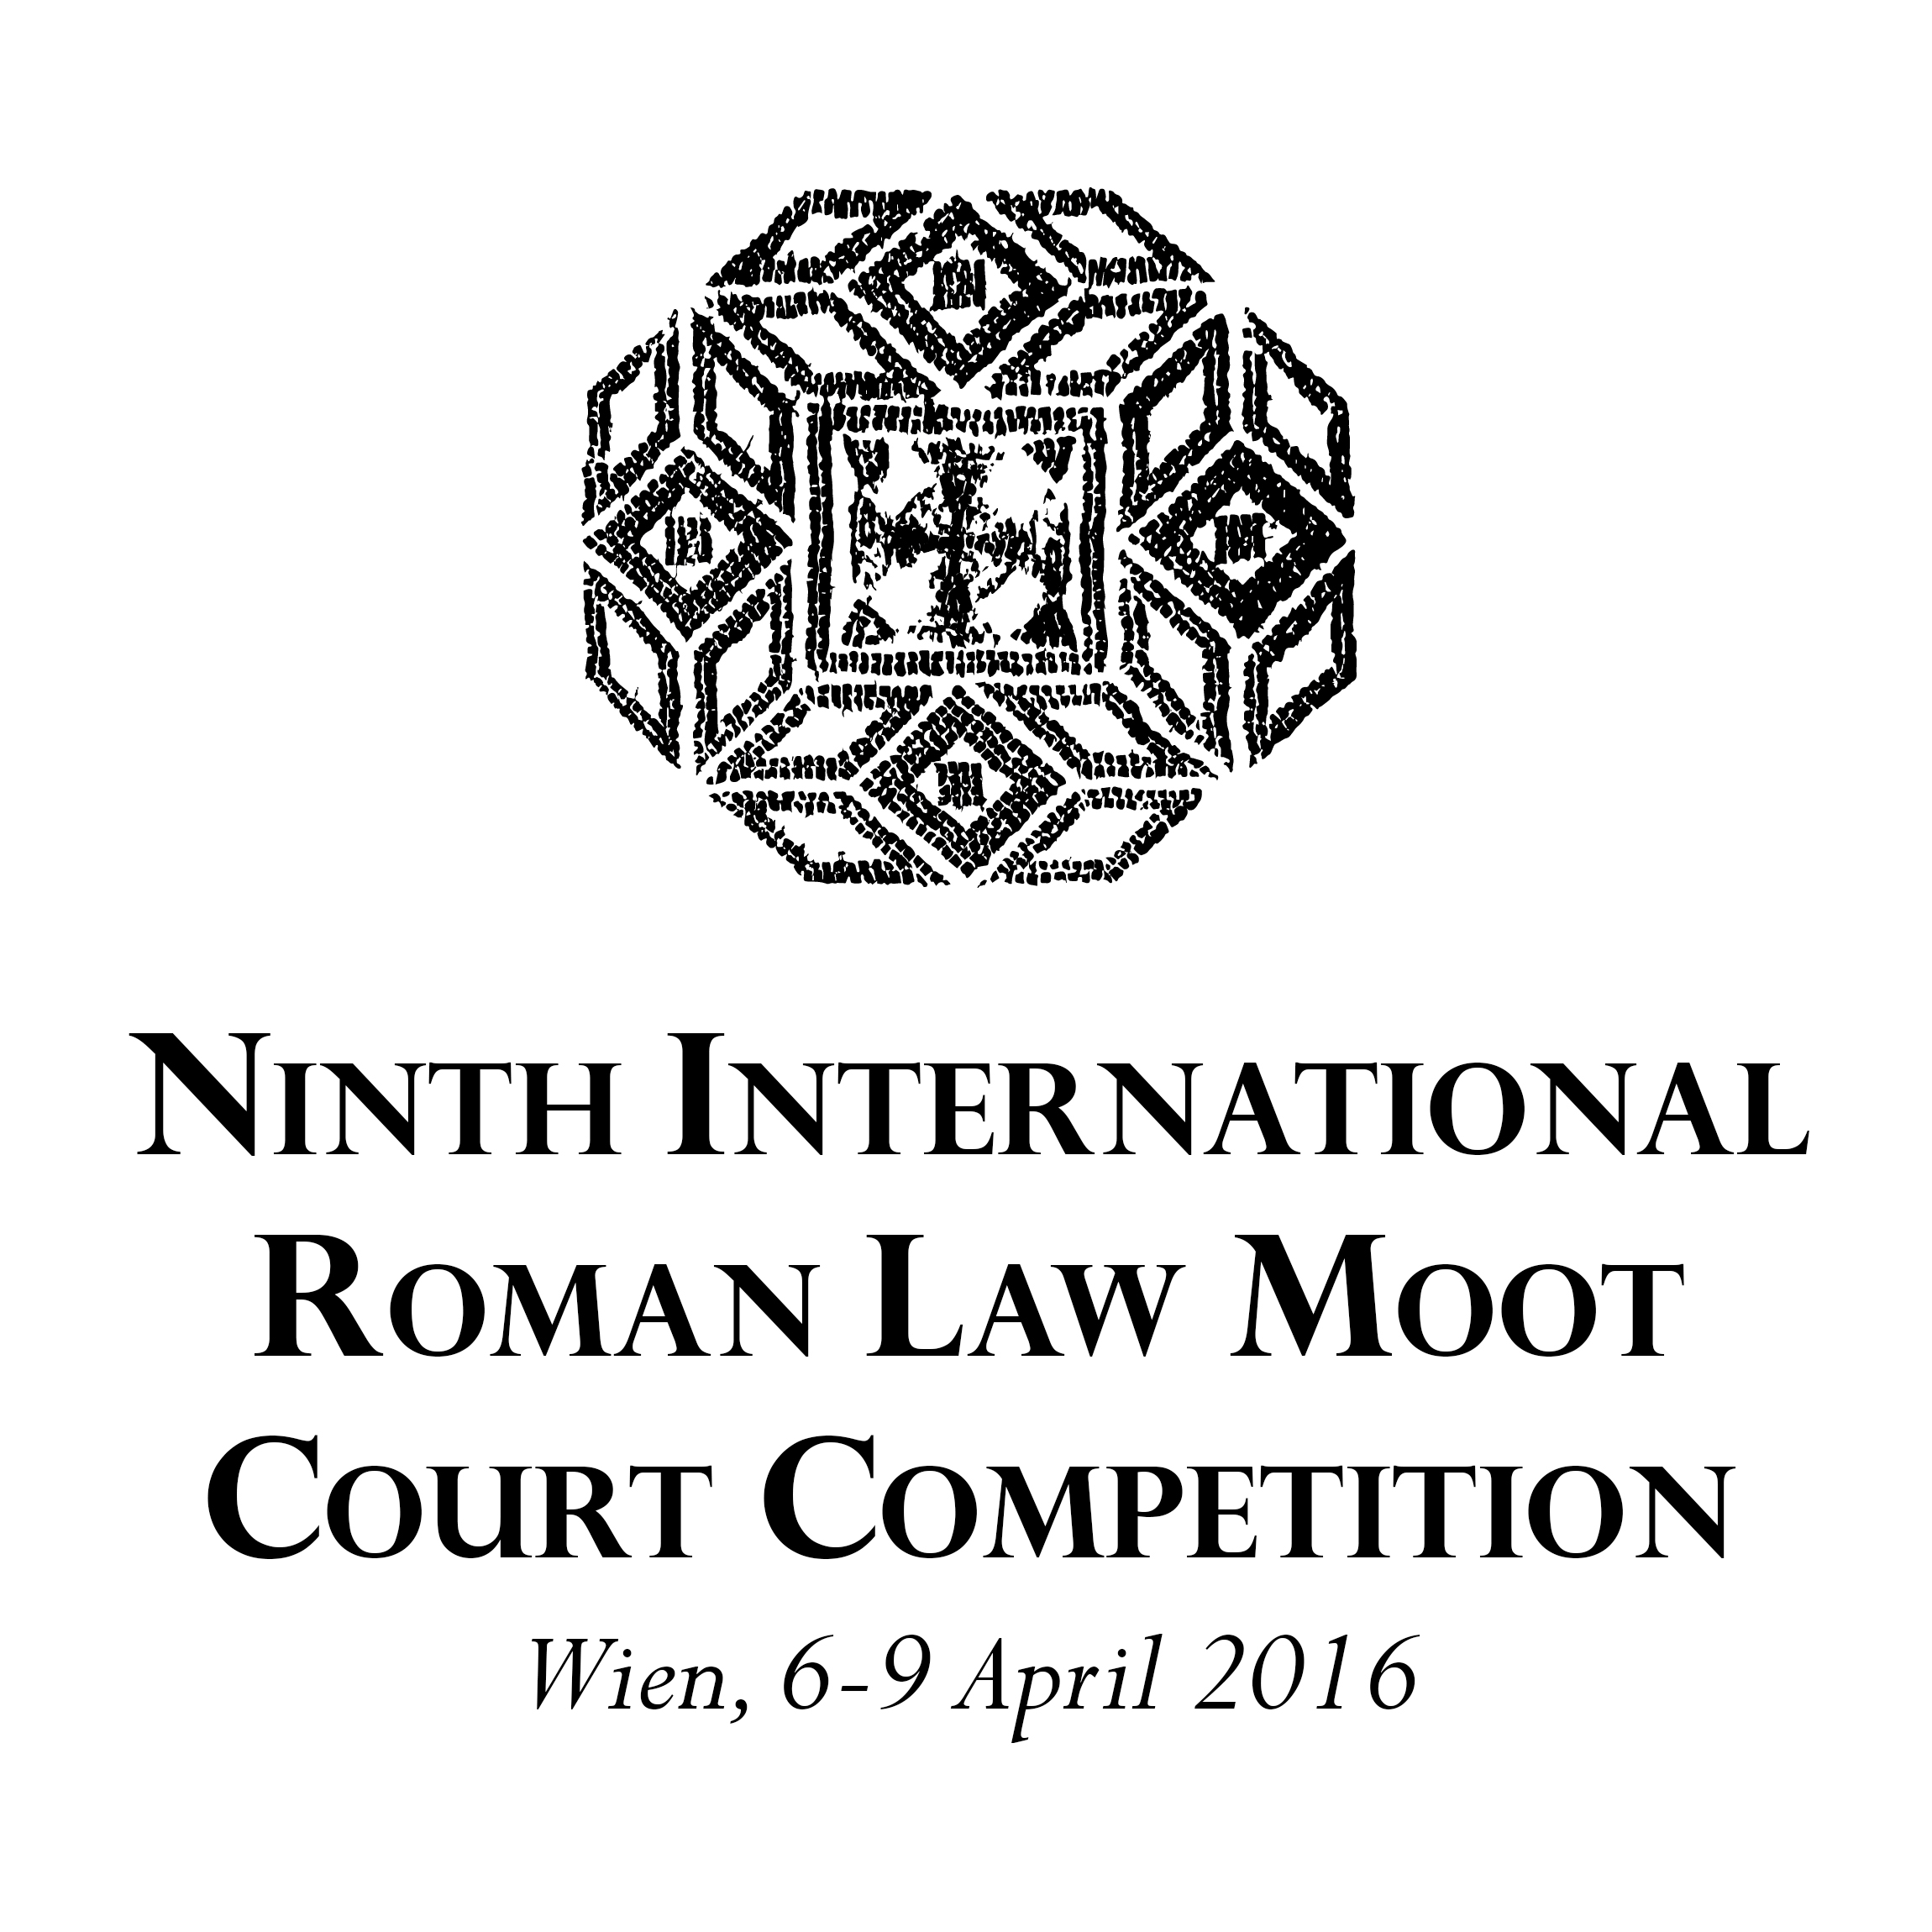 International Roman Law Moot Court Competition